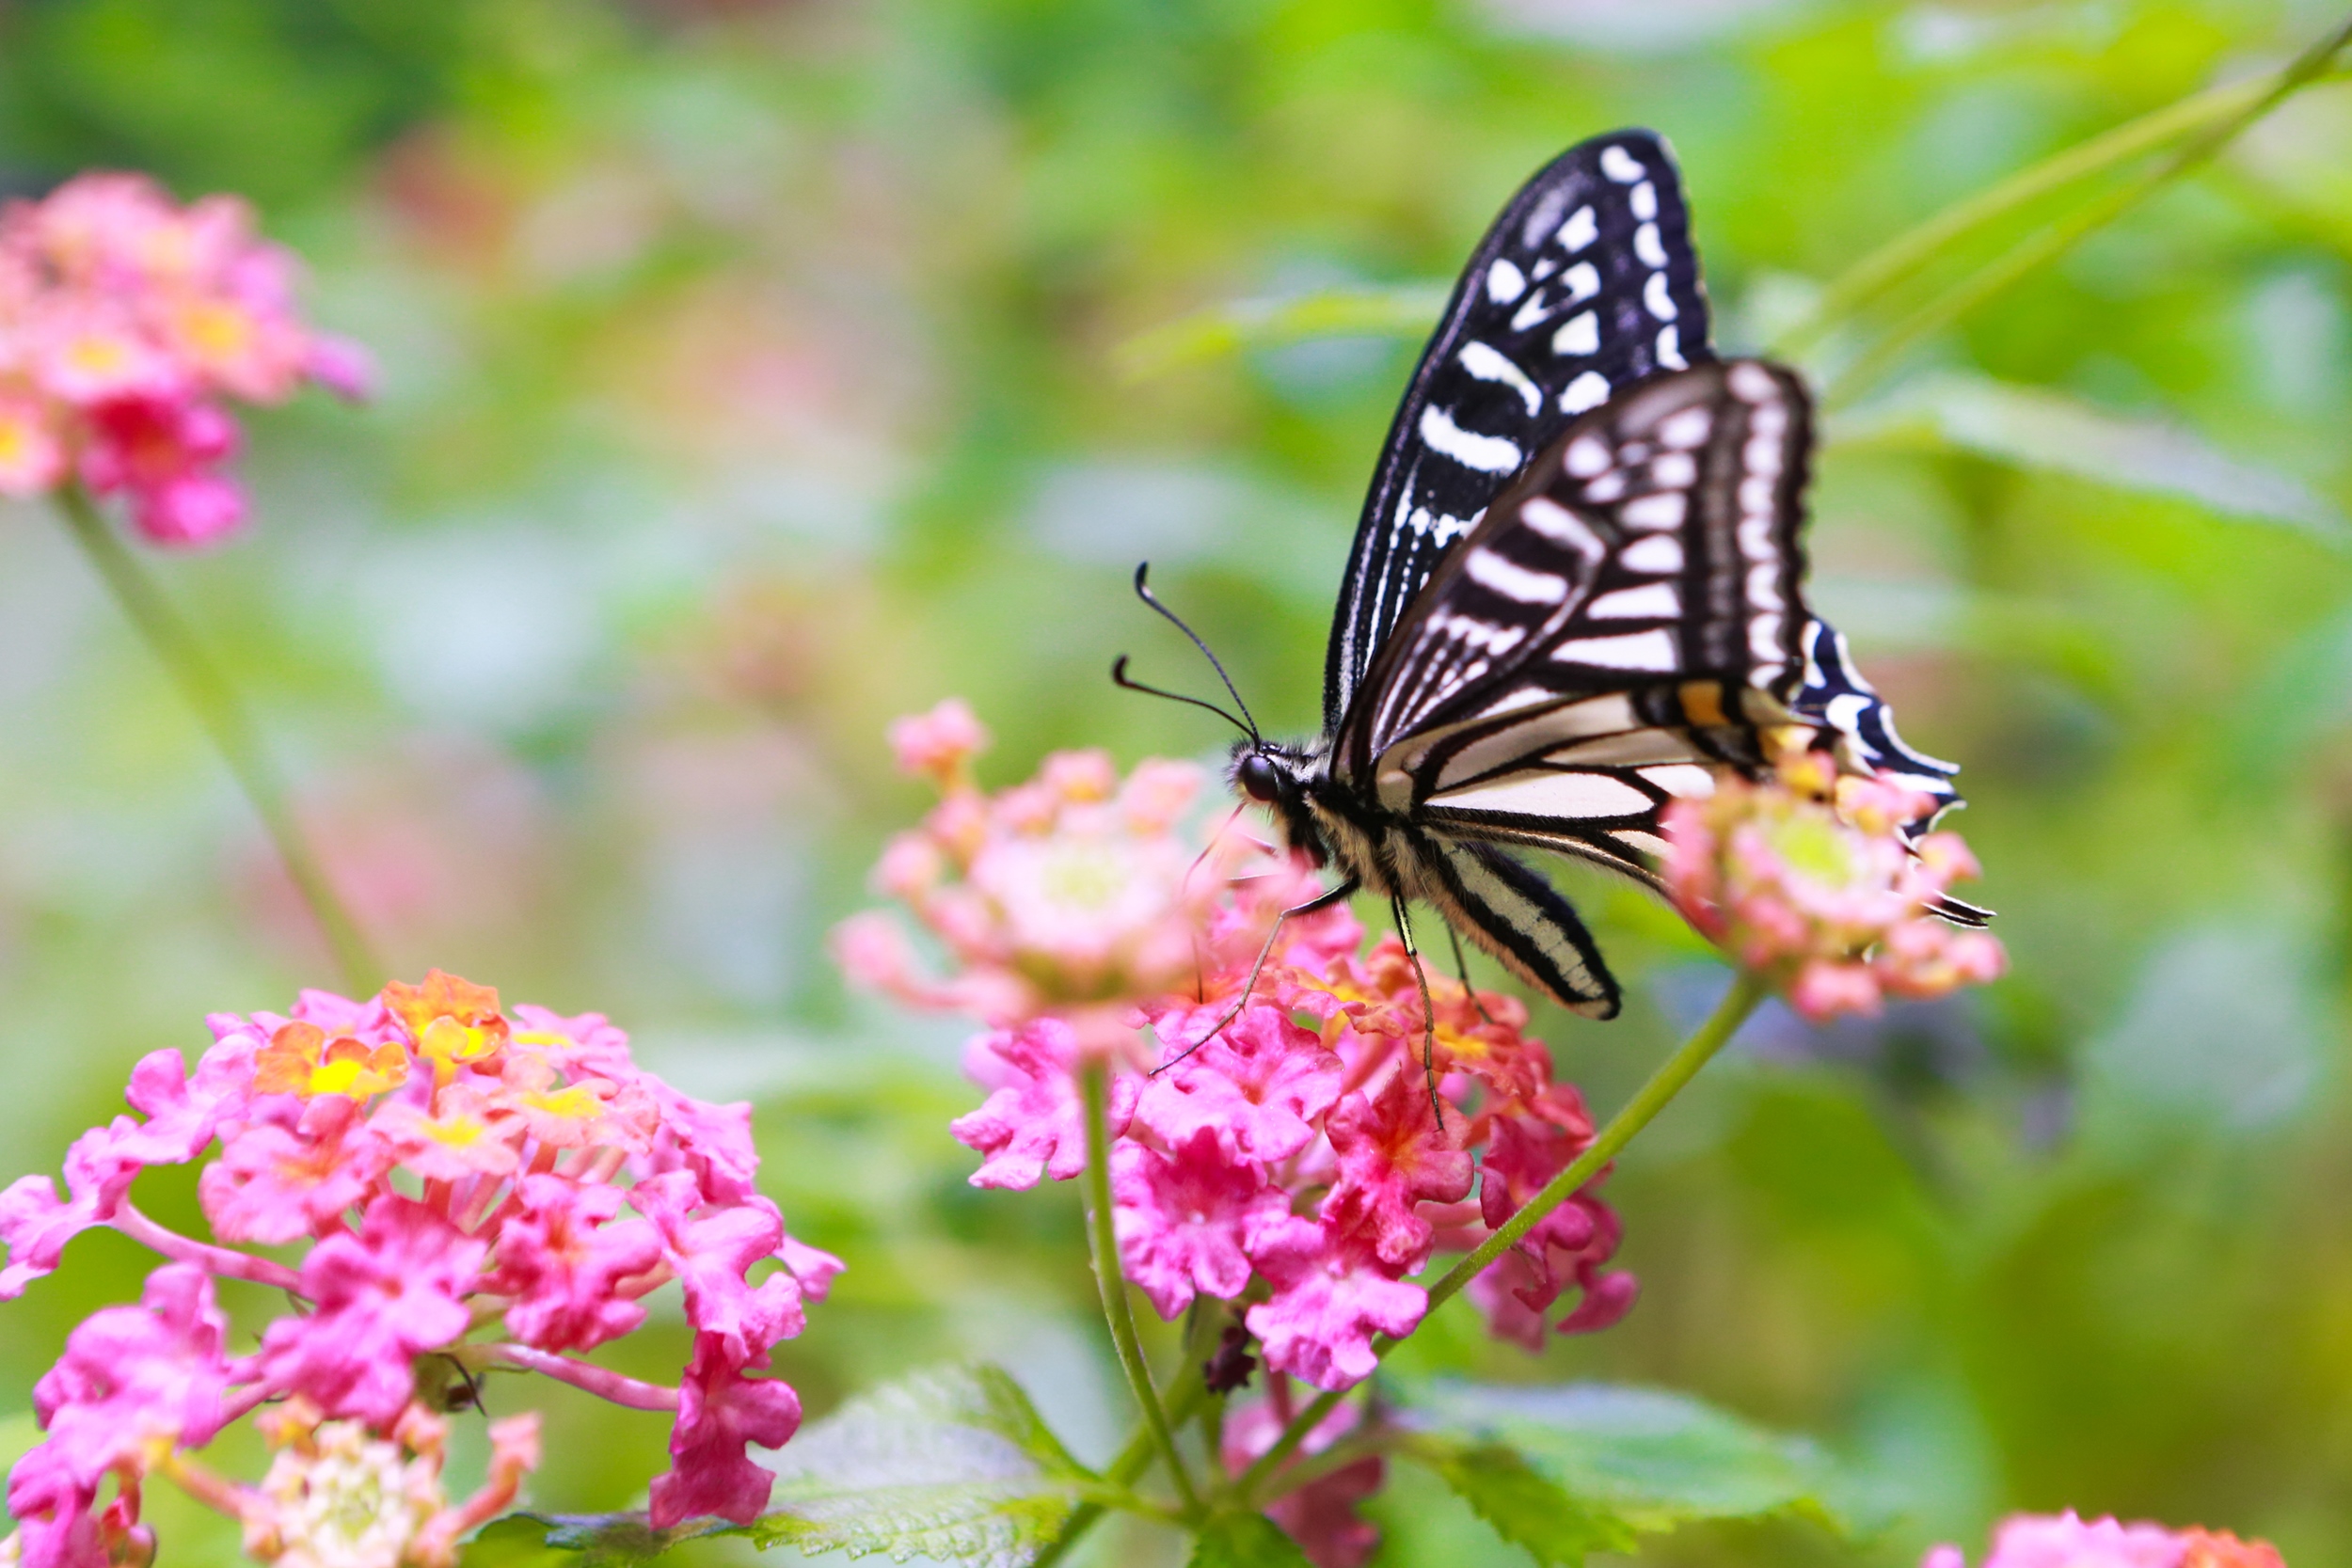 Butterflies are a beautiful reminder in winter that spring is coming.